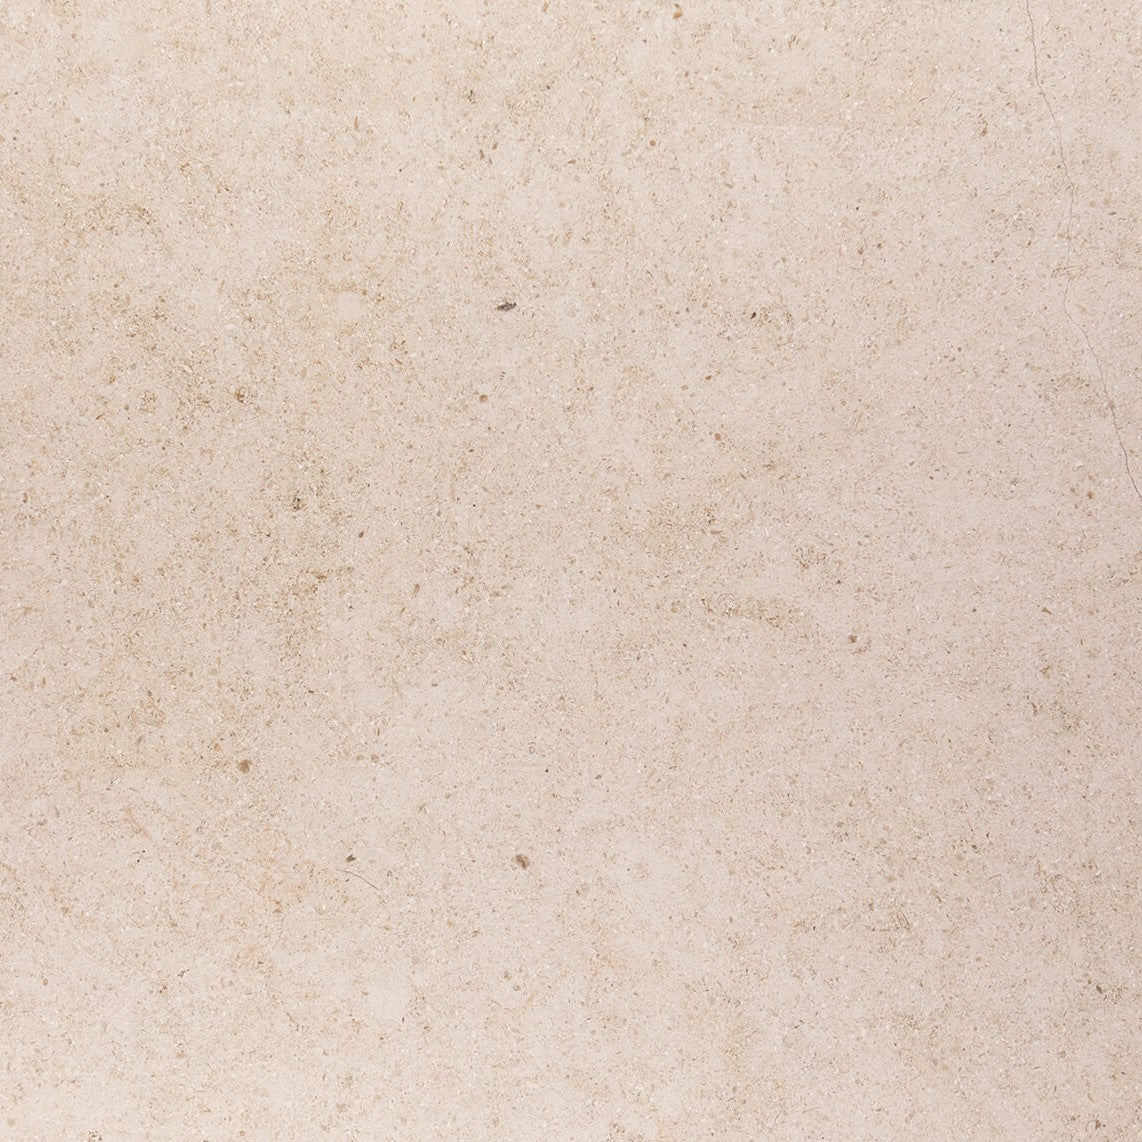 gascogne beige limestone beige stone tile  sold by surface group